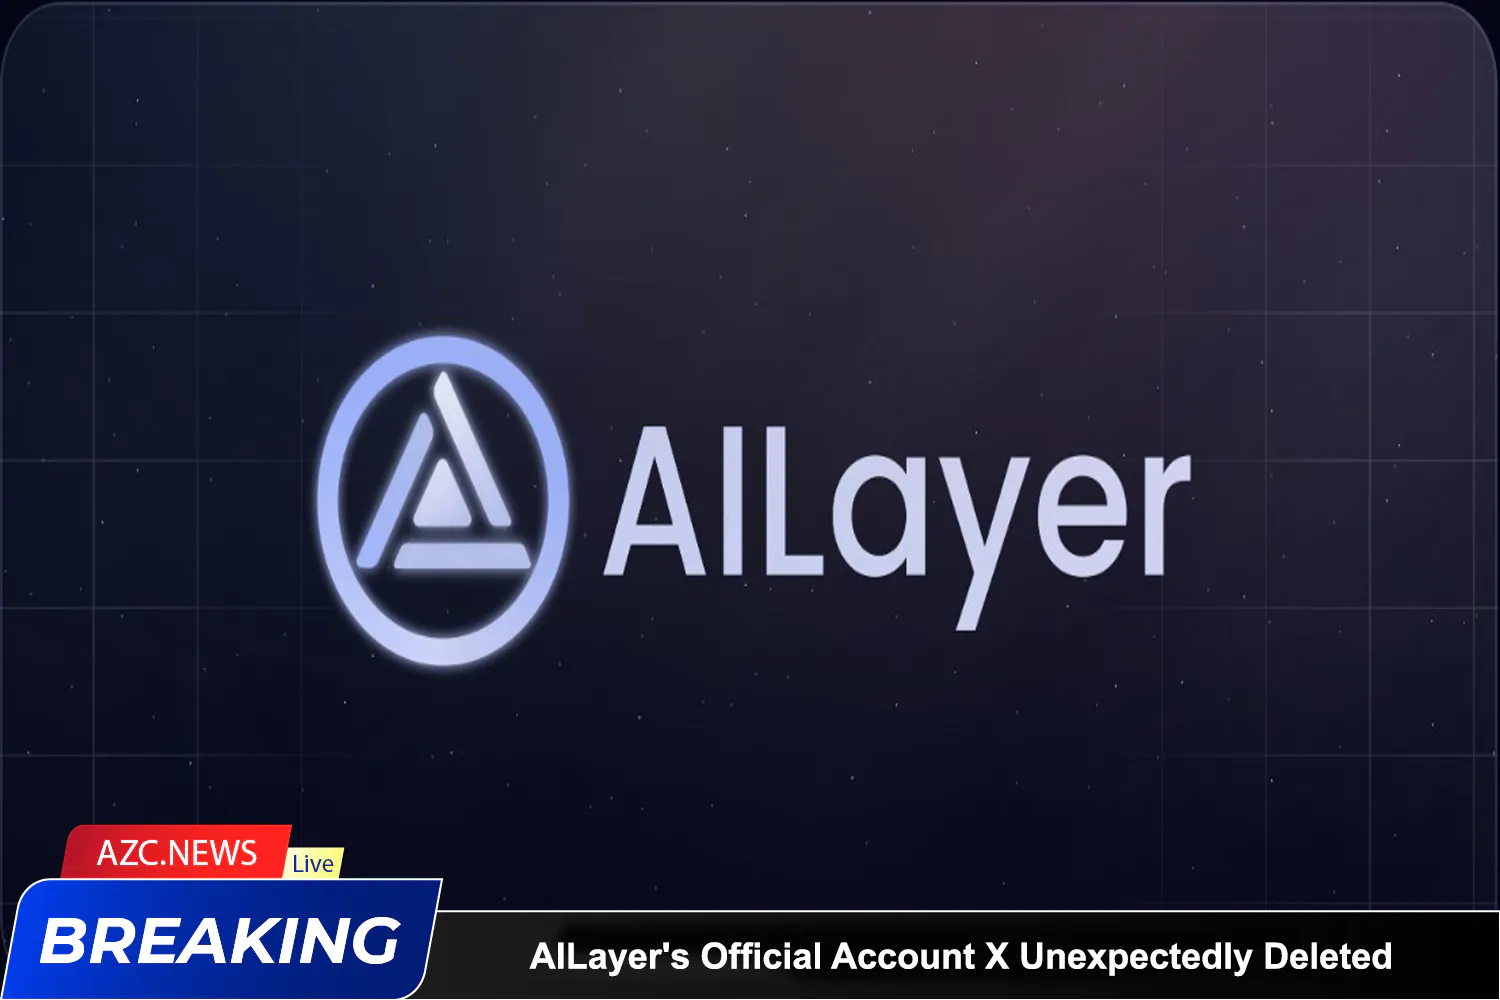 Azcnews Ailayer's Official Account X Unexpectedly Deleted